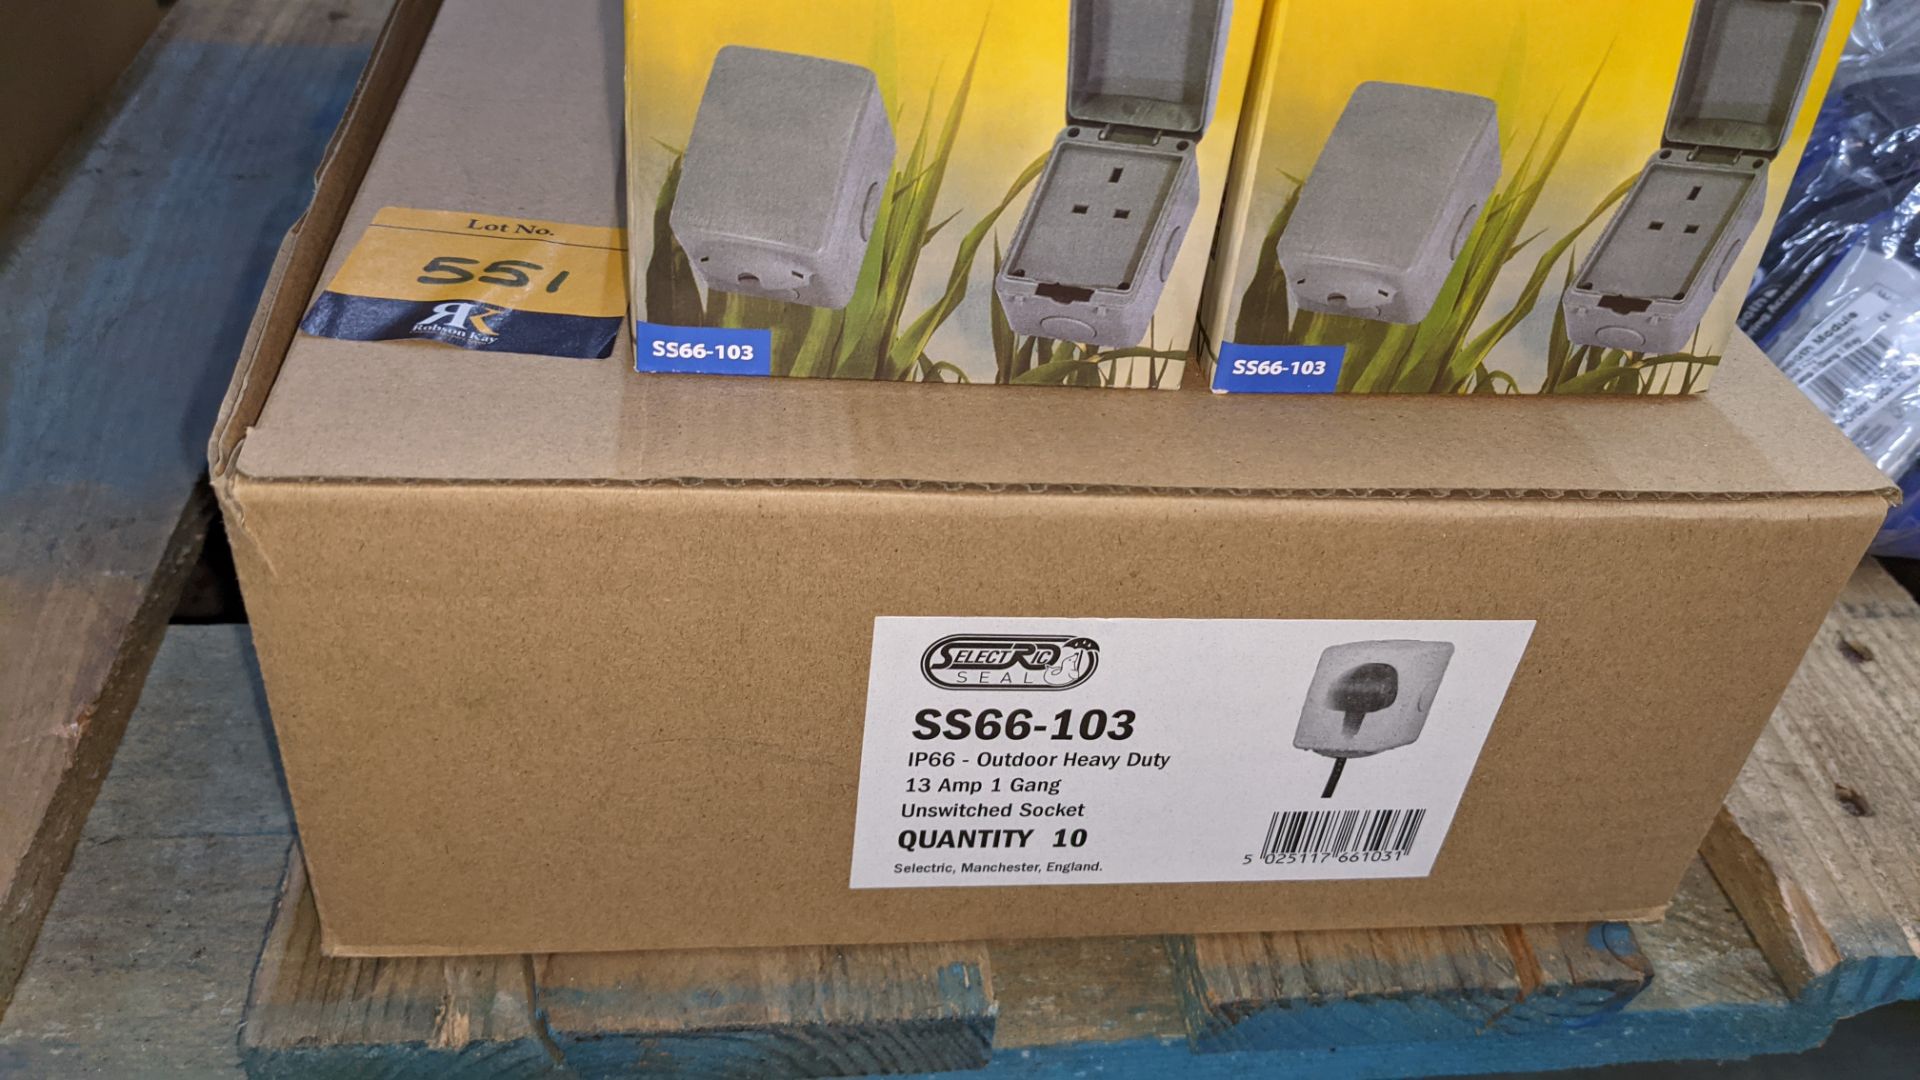 21 off IP66 outdoor heavy duty 13 amp 1 gang unswitched sockets - Image 3 of 6